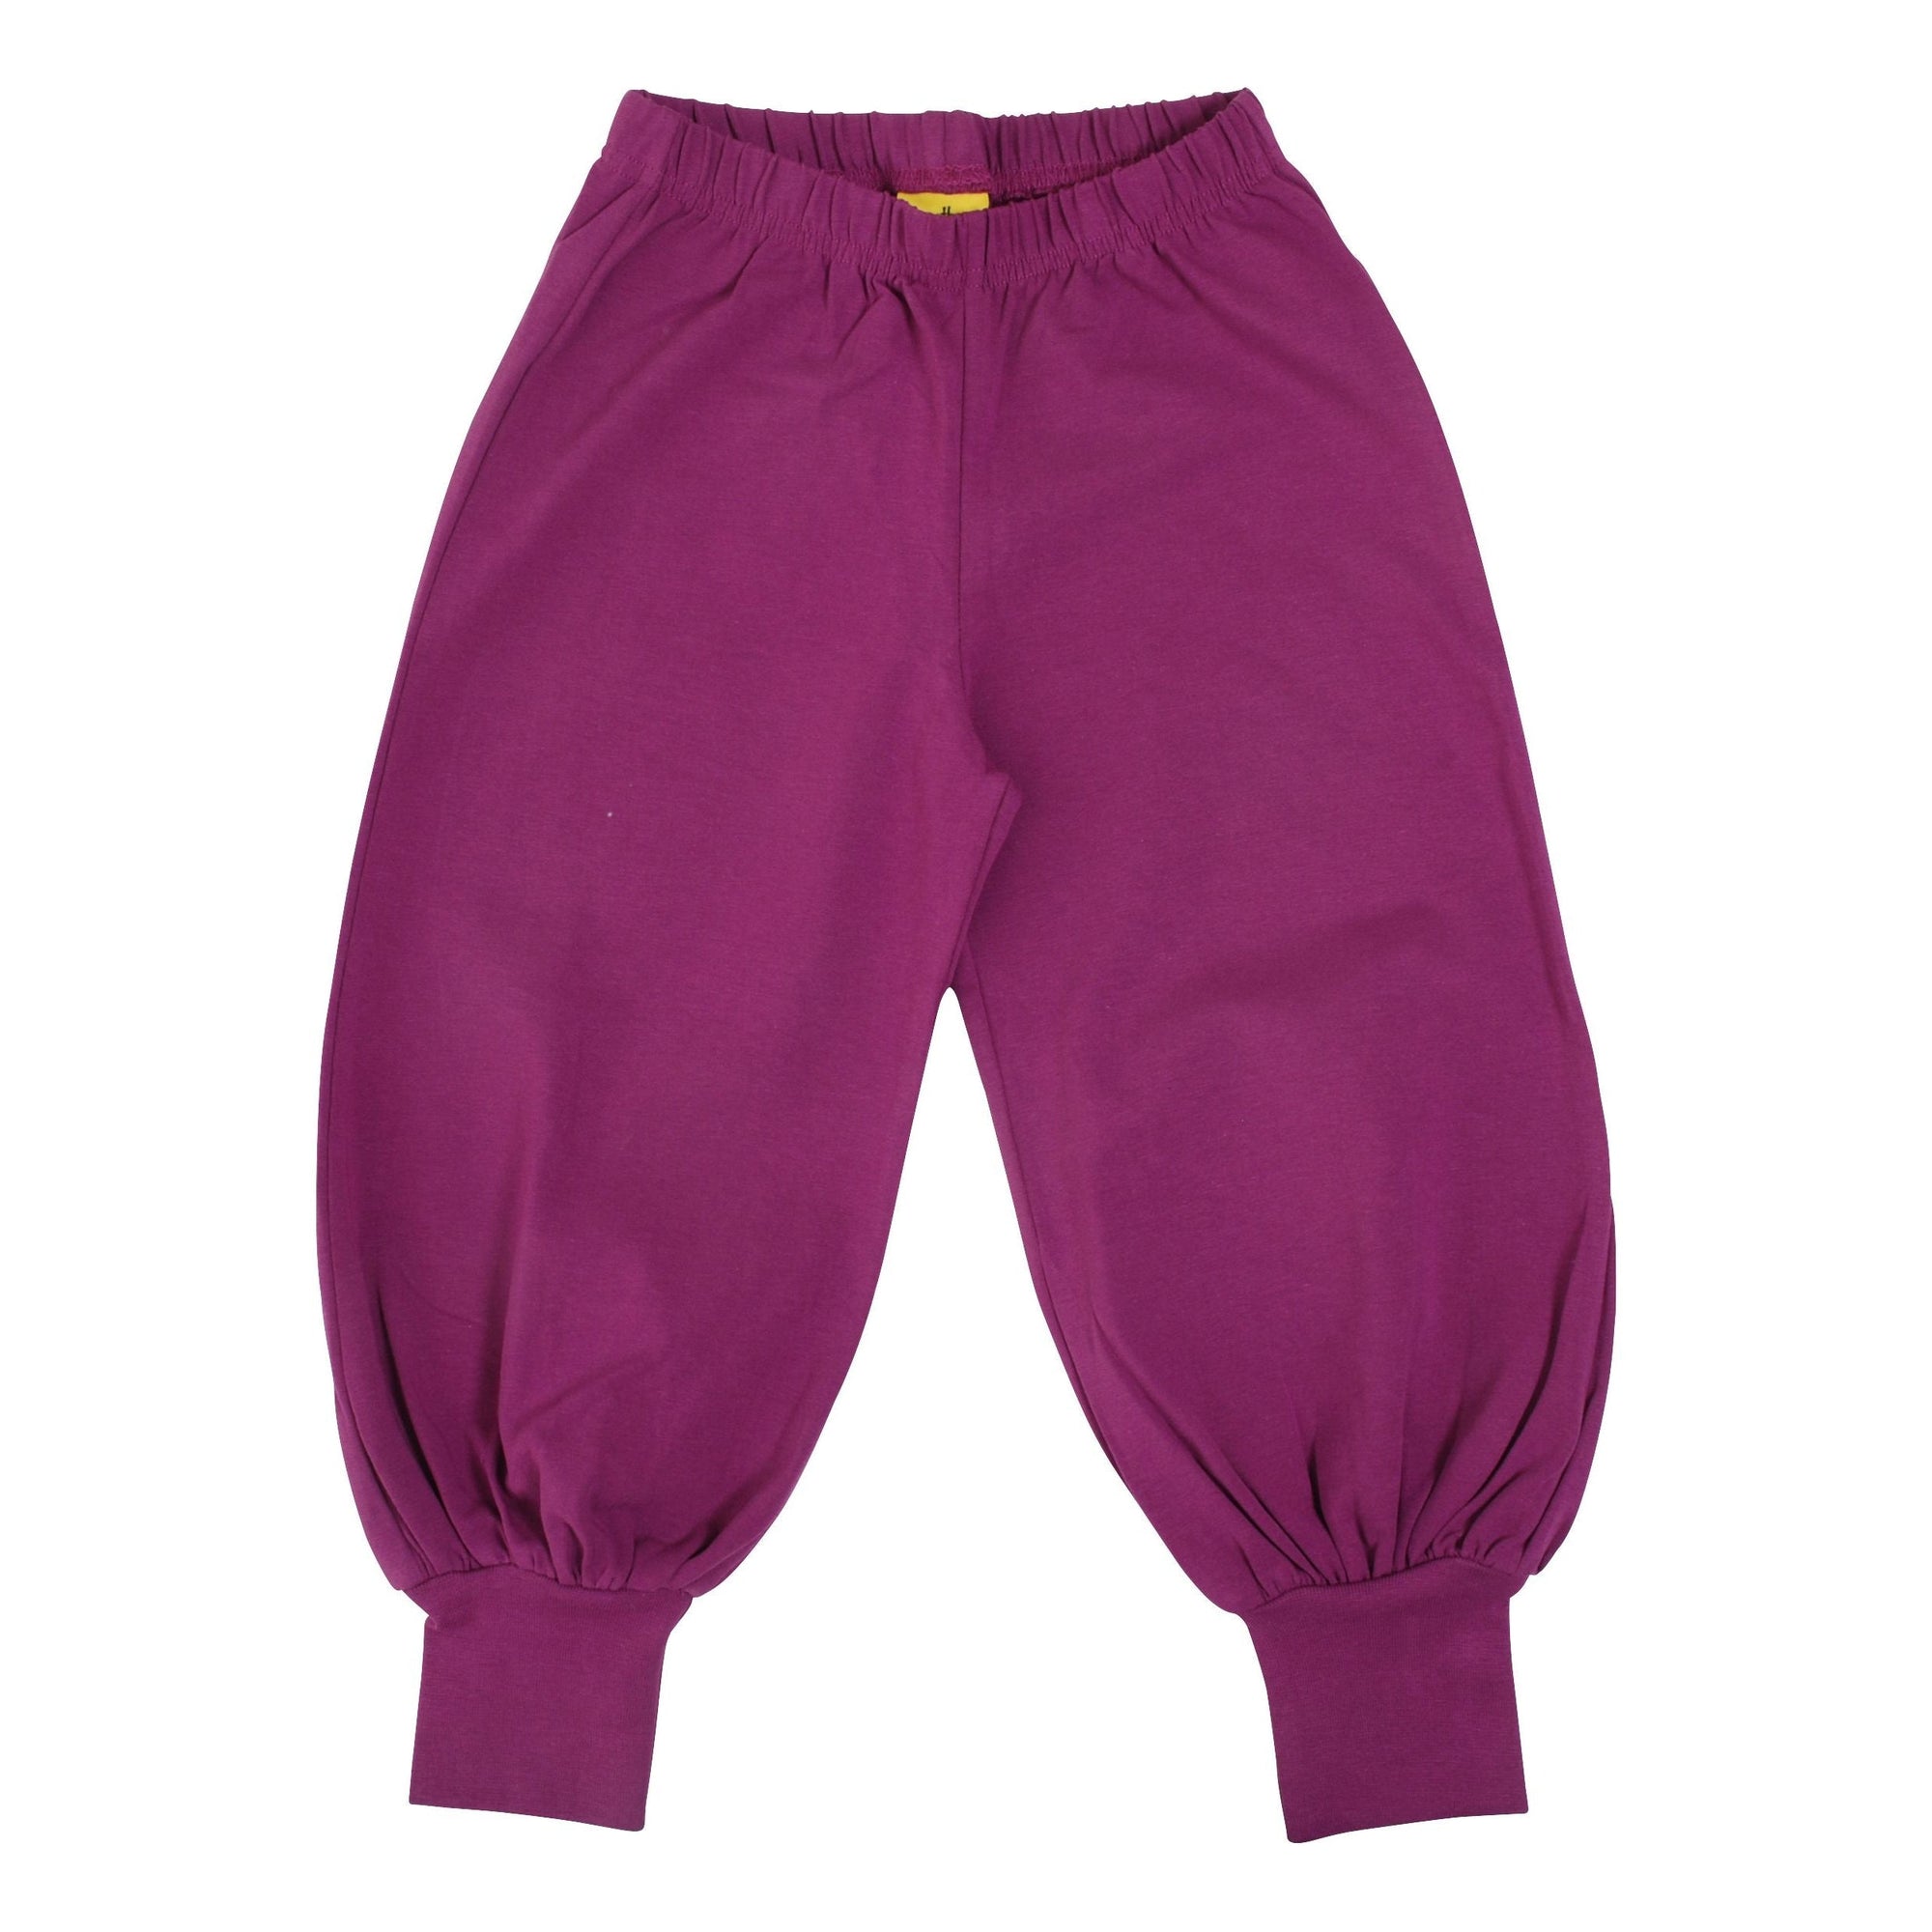 Hyacinth Violet Baggy Pants - 2 Left Size 12-14 years-More Than A Fling-Modern Rascals